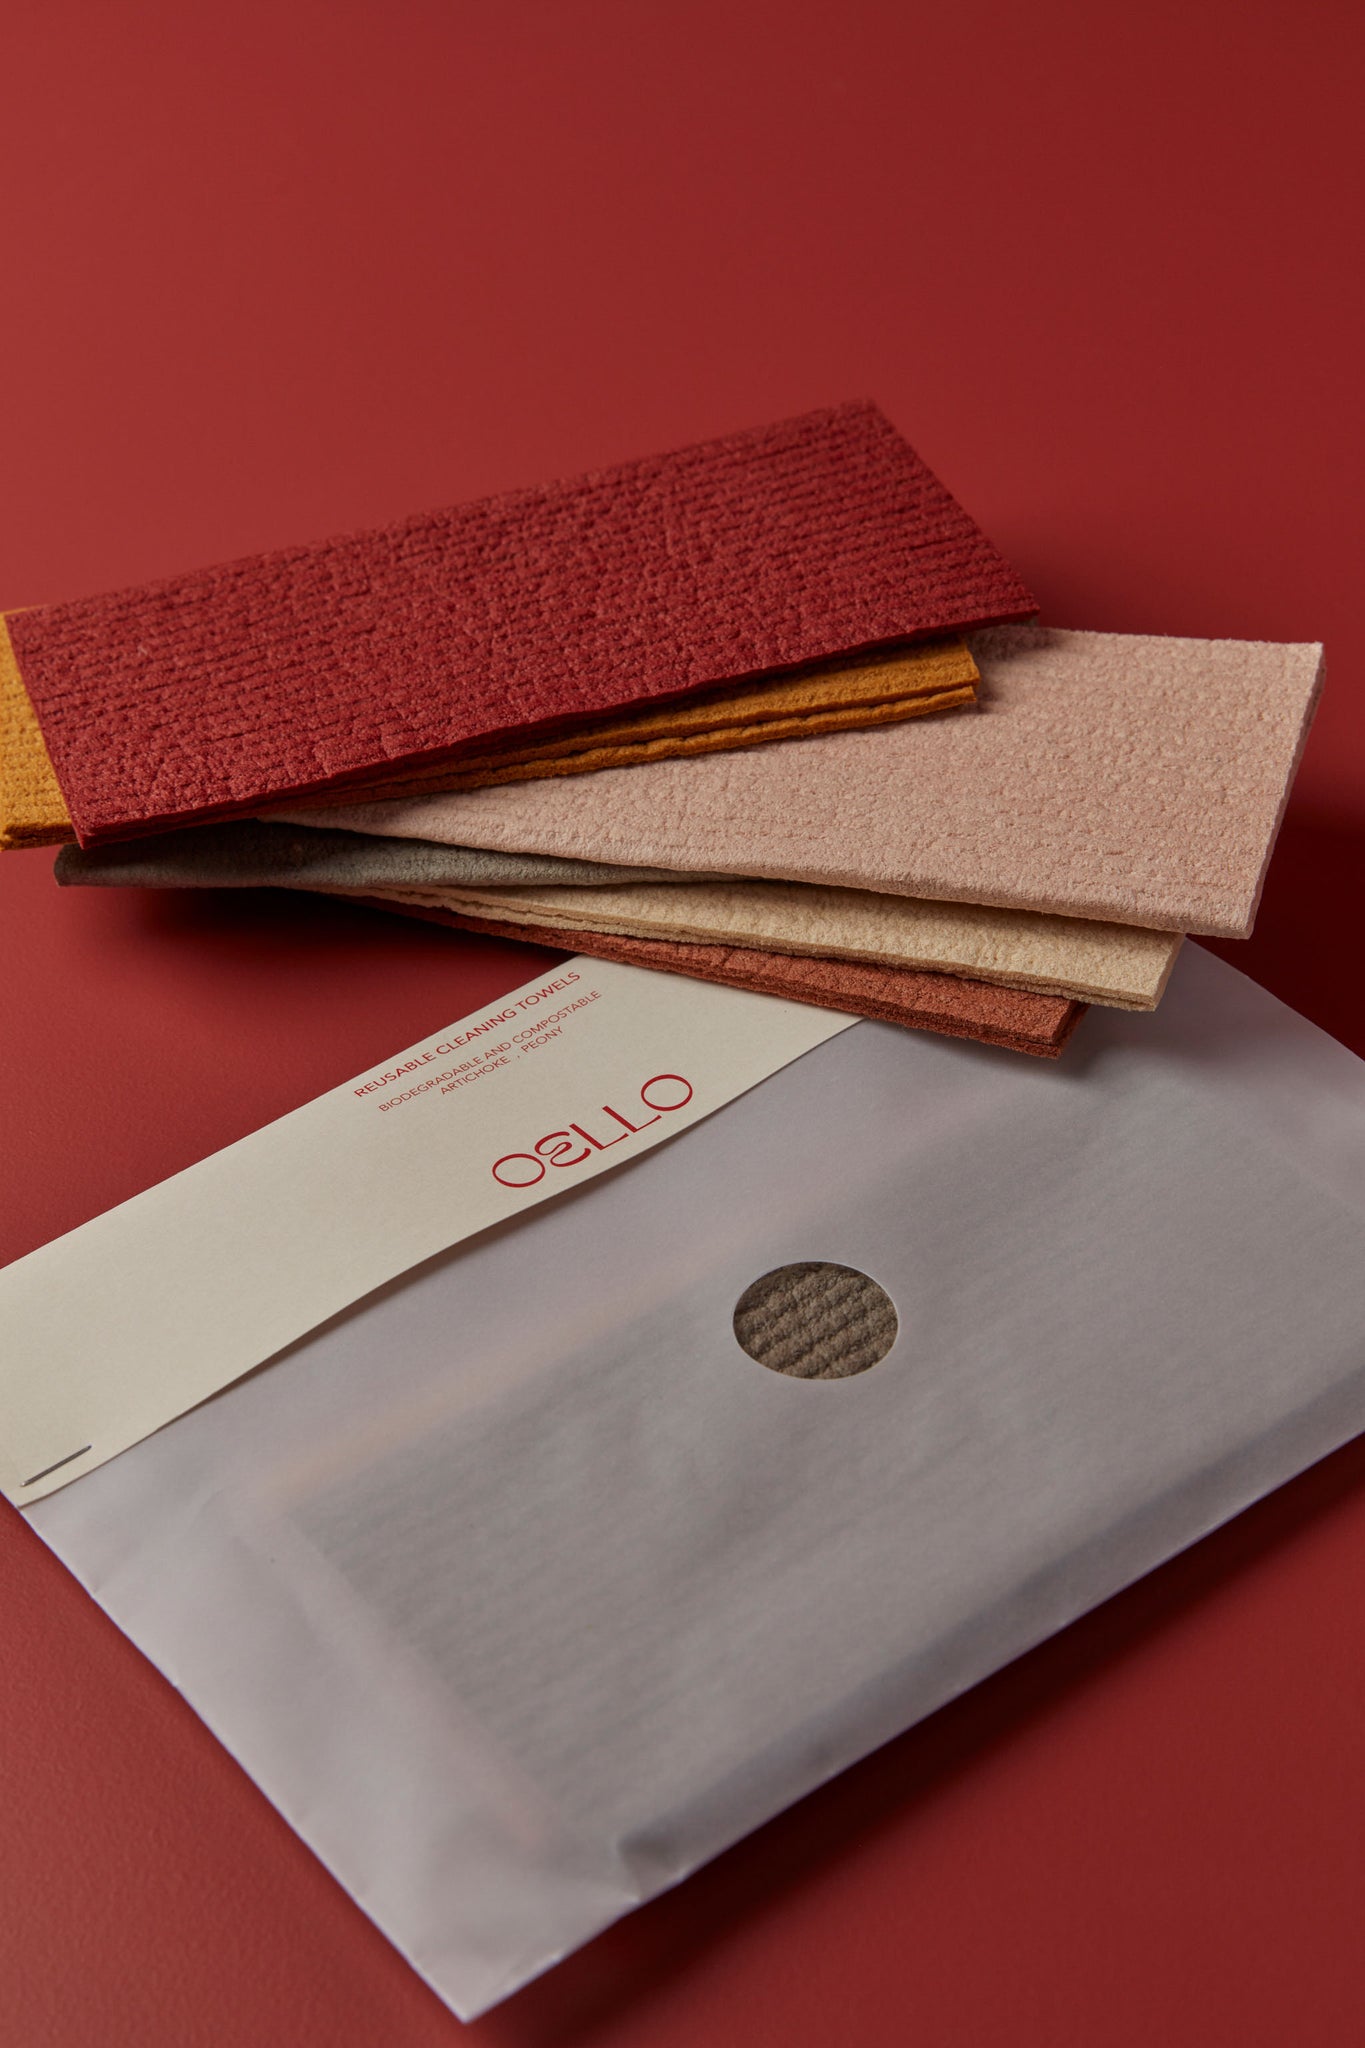 Oello - Reusable Cleaning Towel, Sumac and Dijon